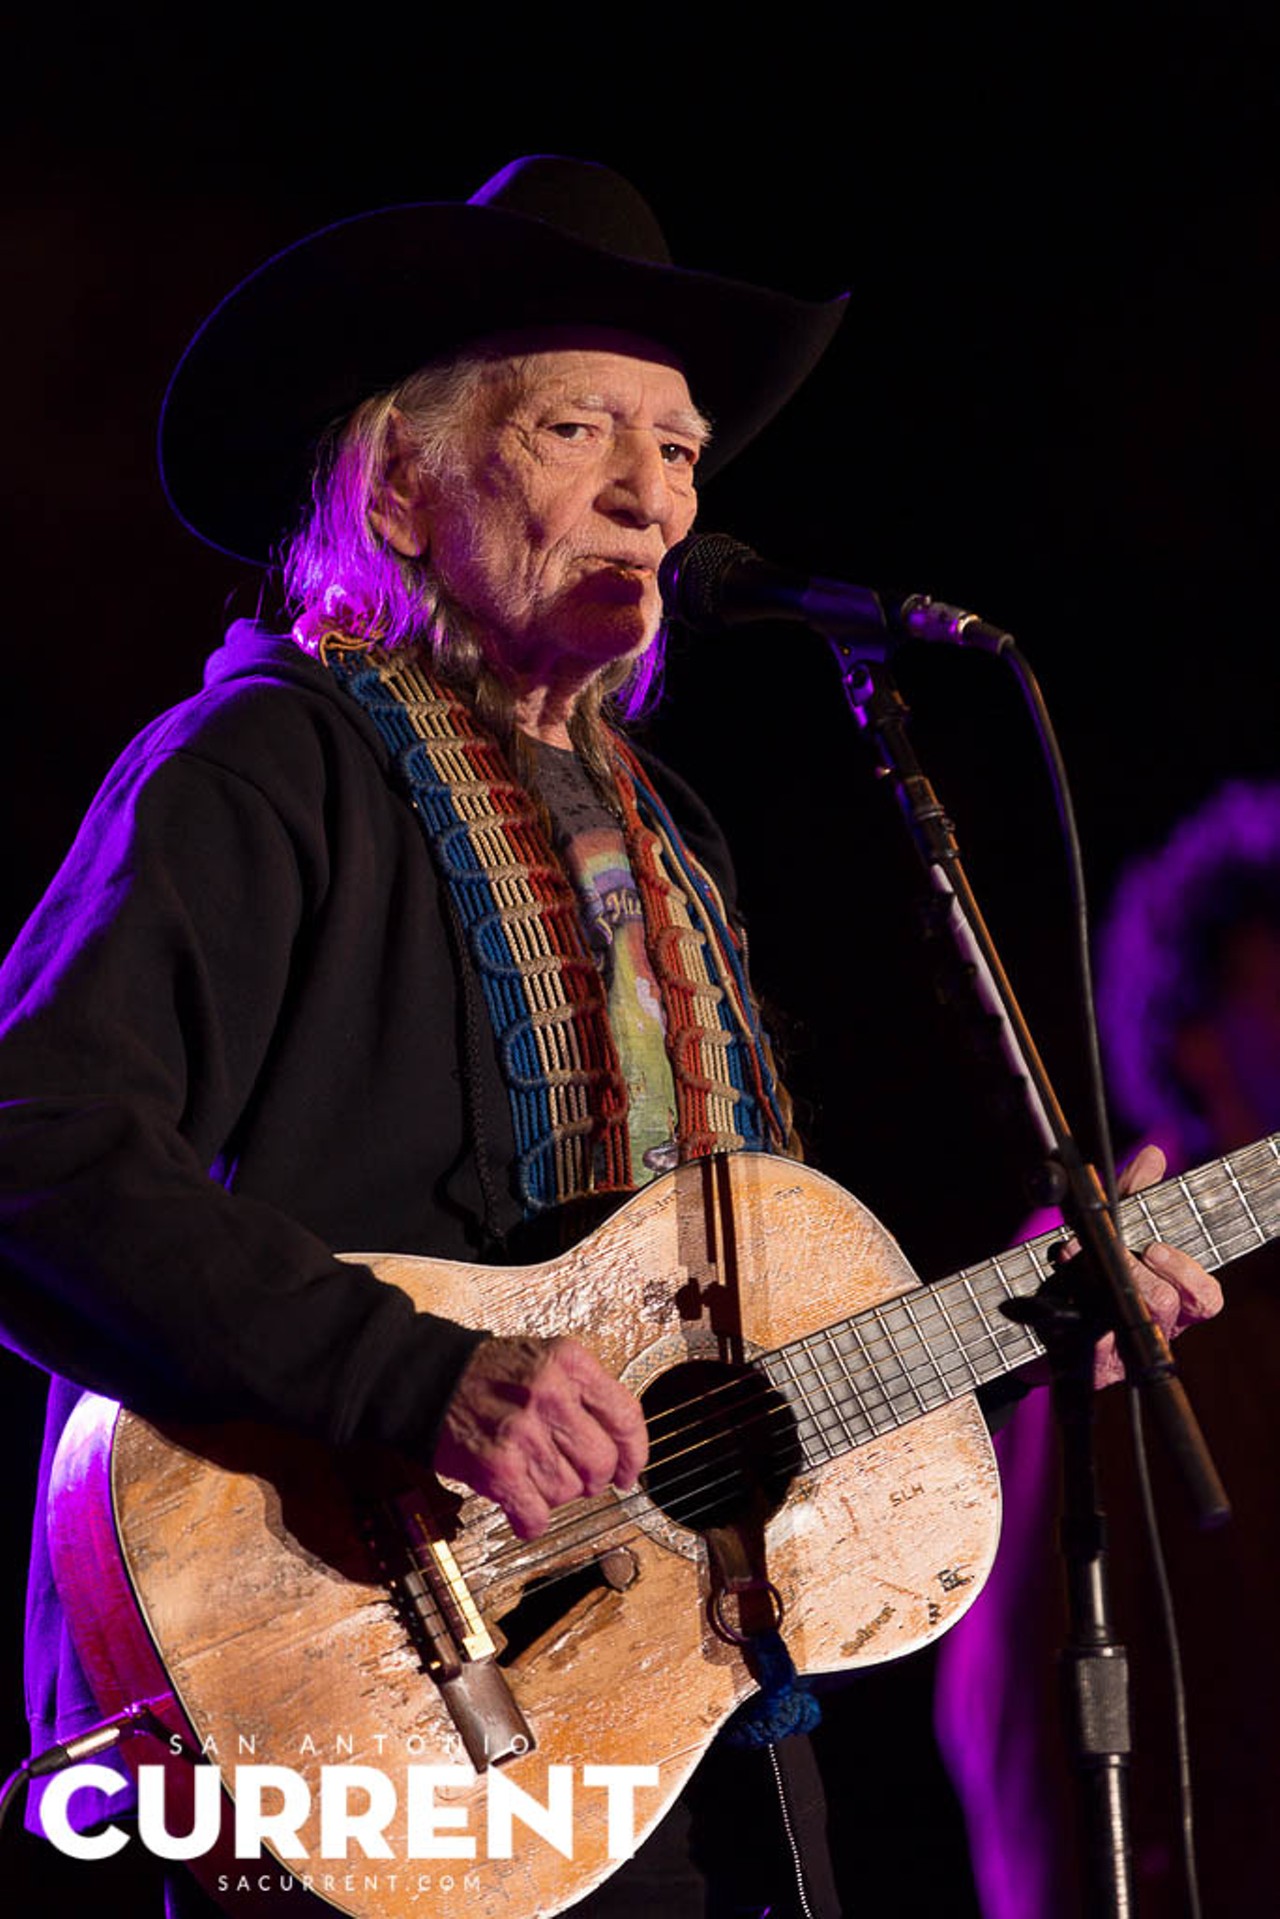 38 Photos Of Willie Nelson And Merle Haggard At WhiteWater Amphitheater